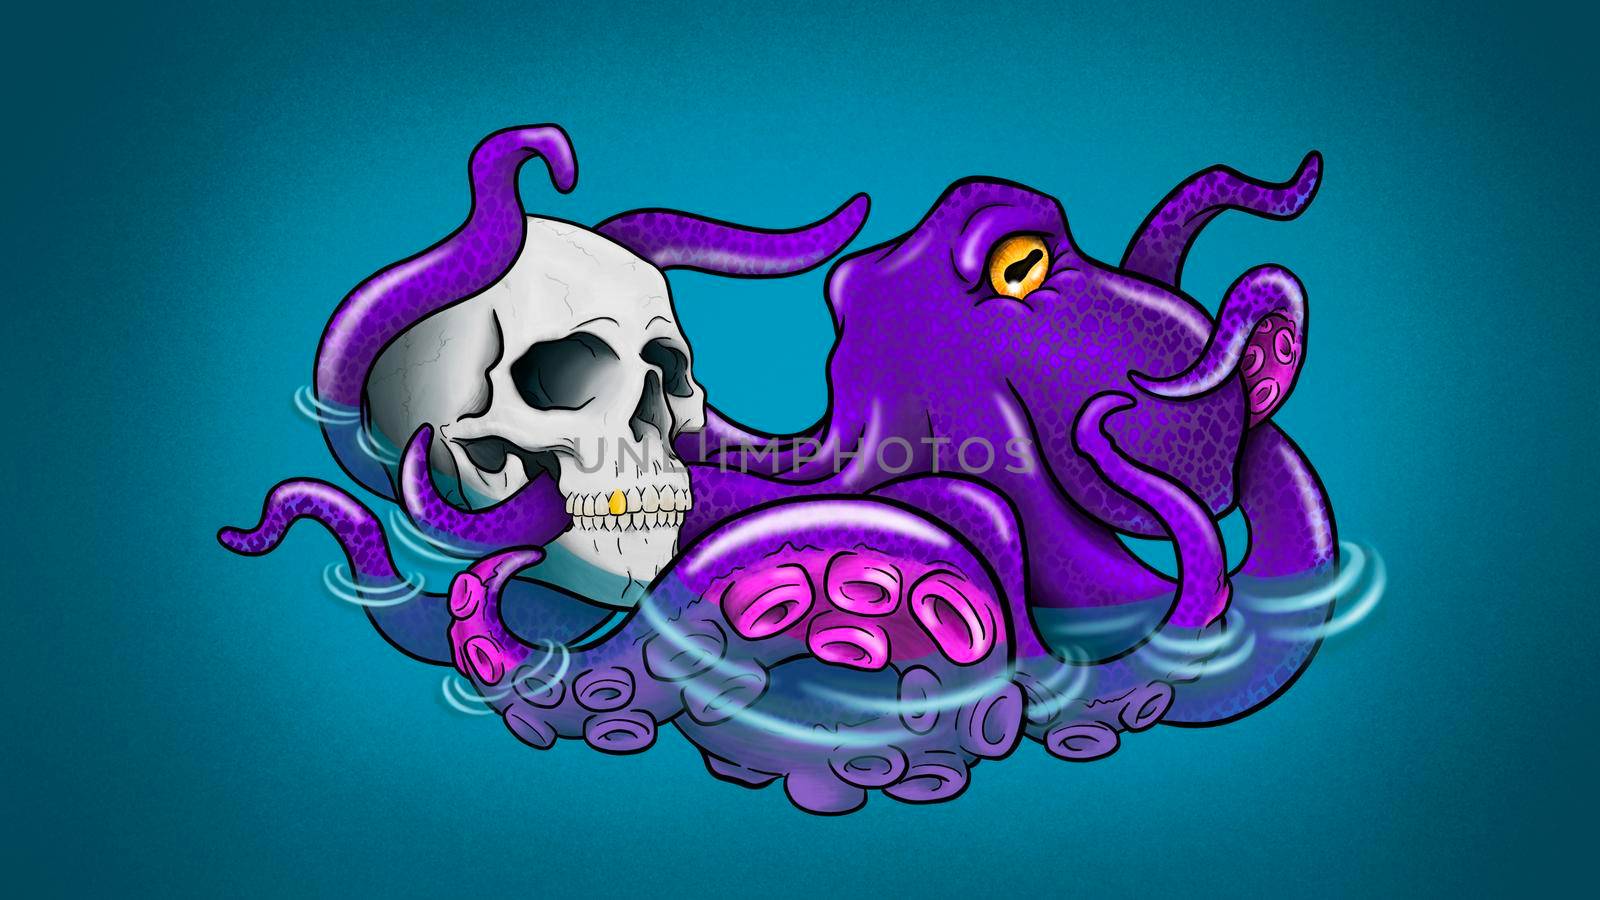 background on the desktop colored bright octopus with a skull by kr0k0